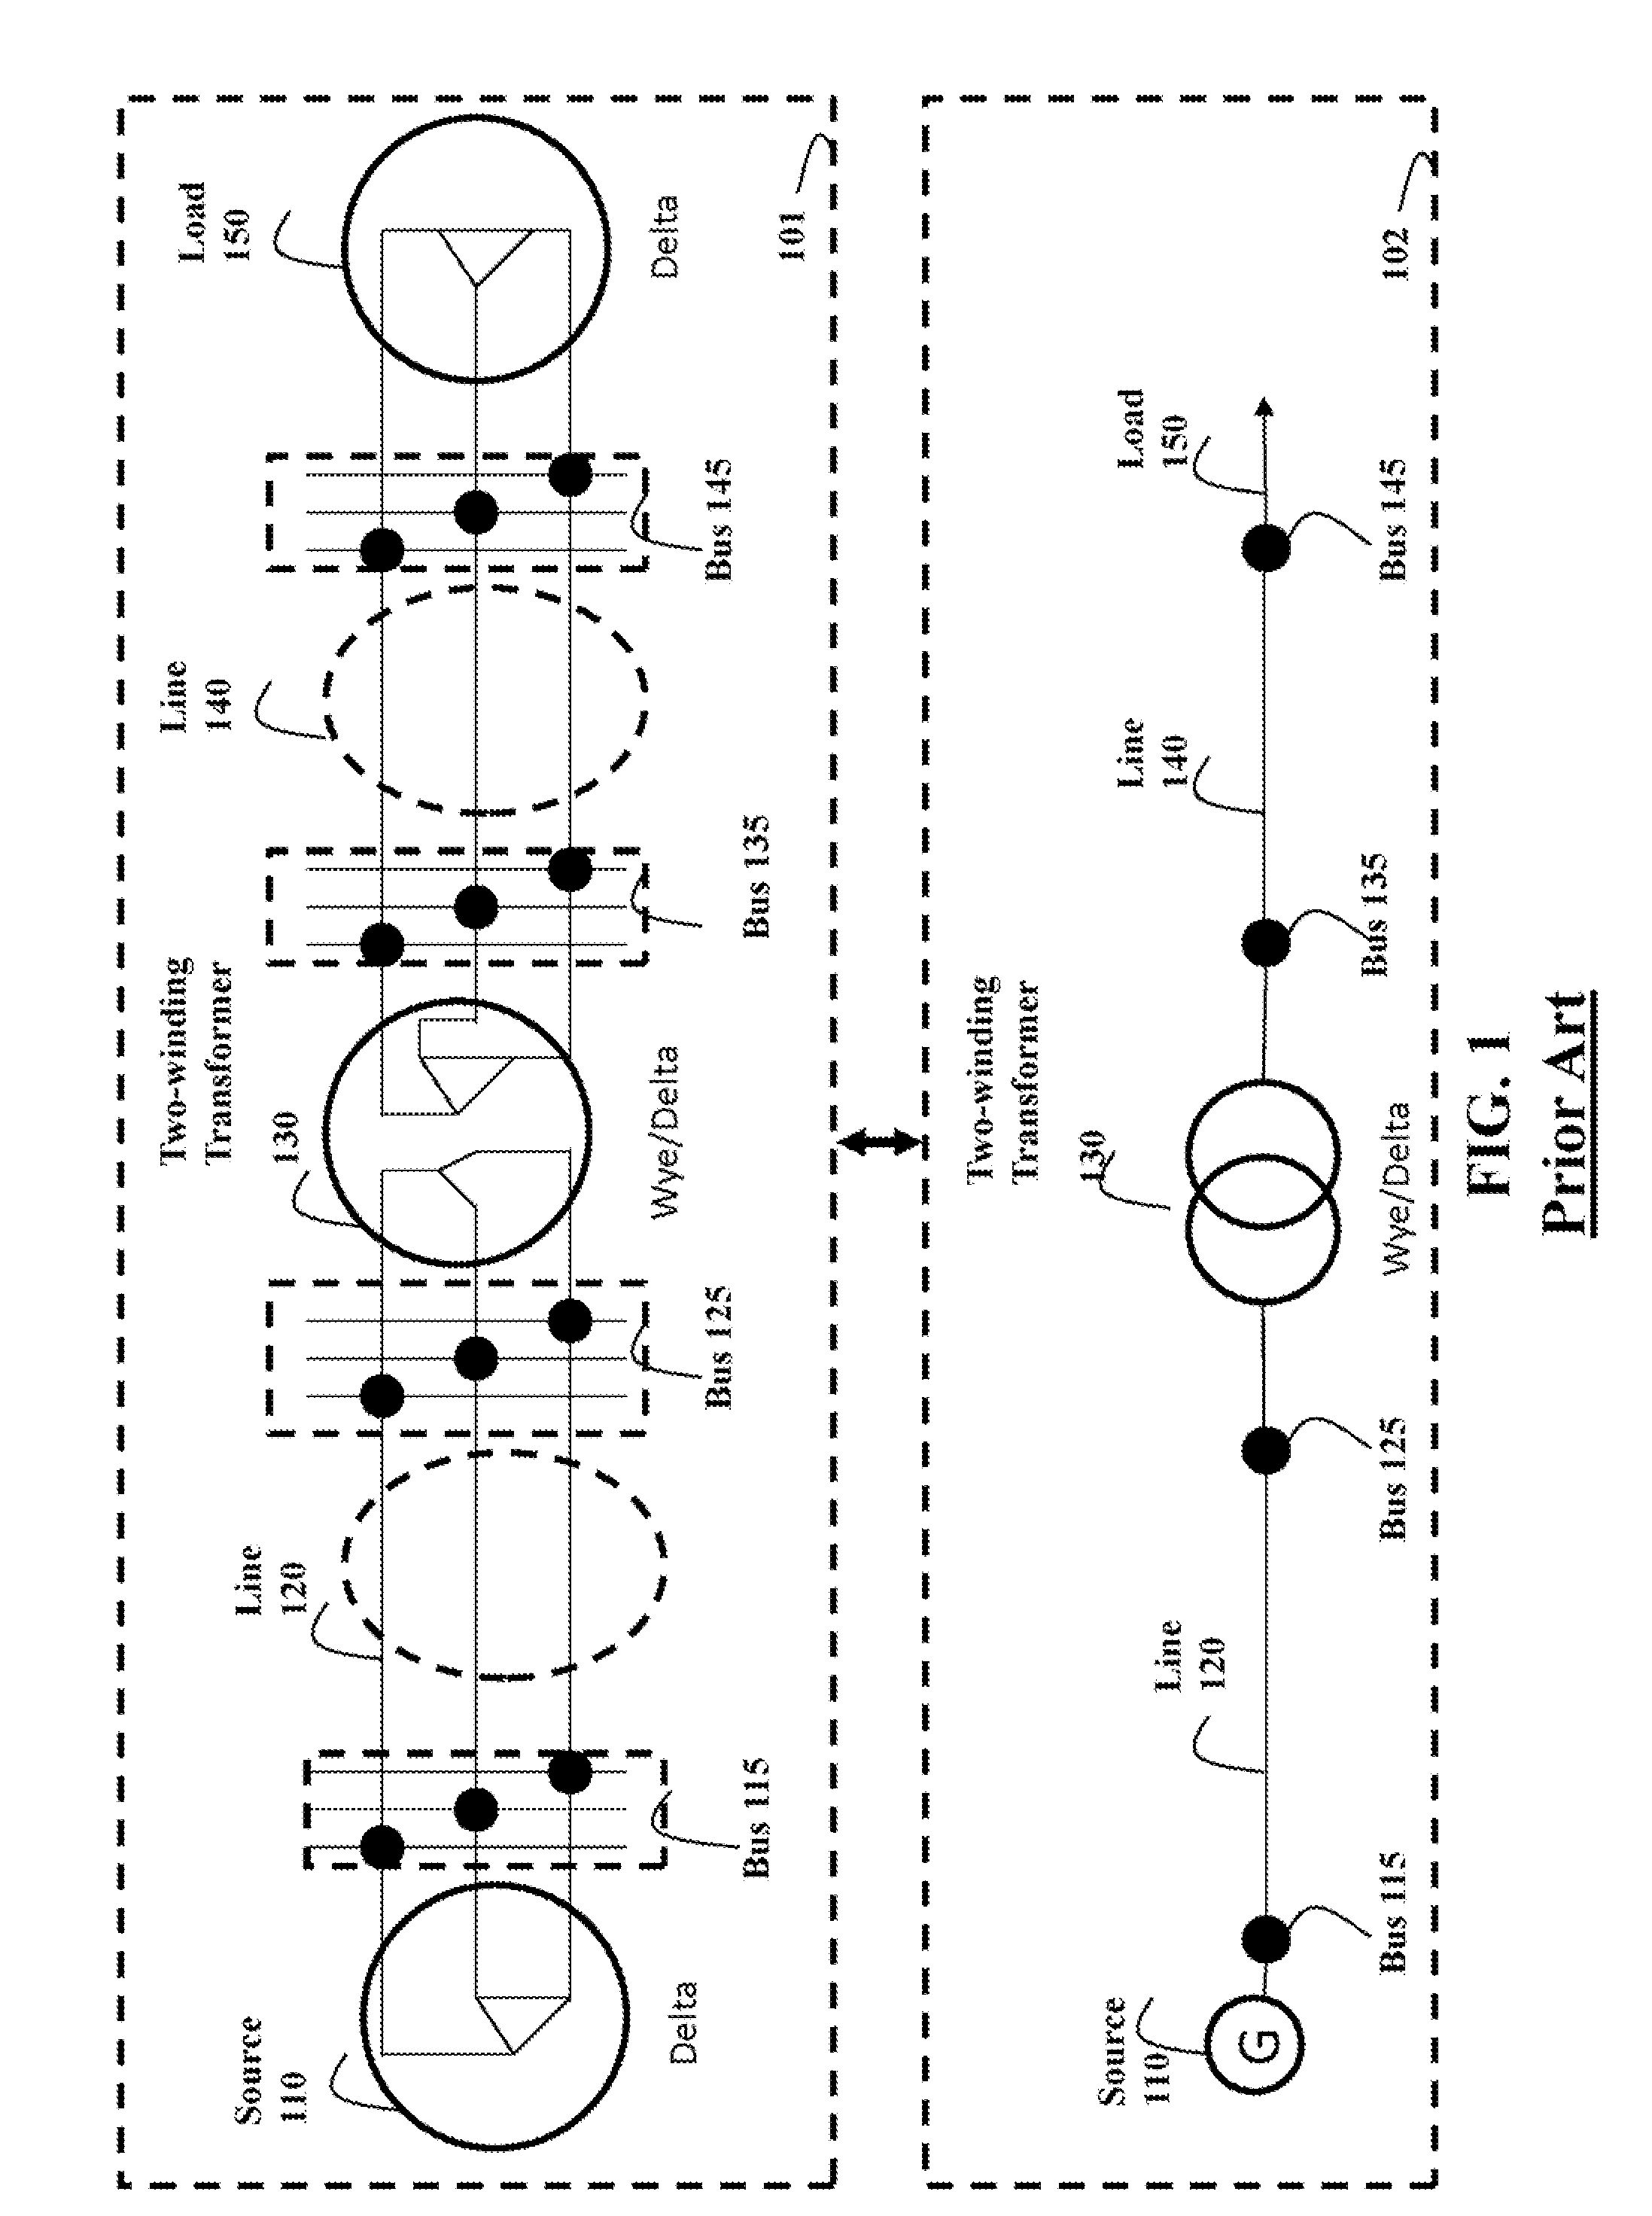 Hybrid three-phase power flow analysis method for ungrounded distribution systems